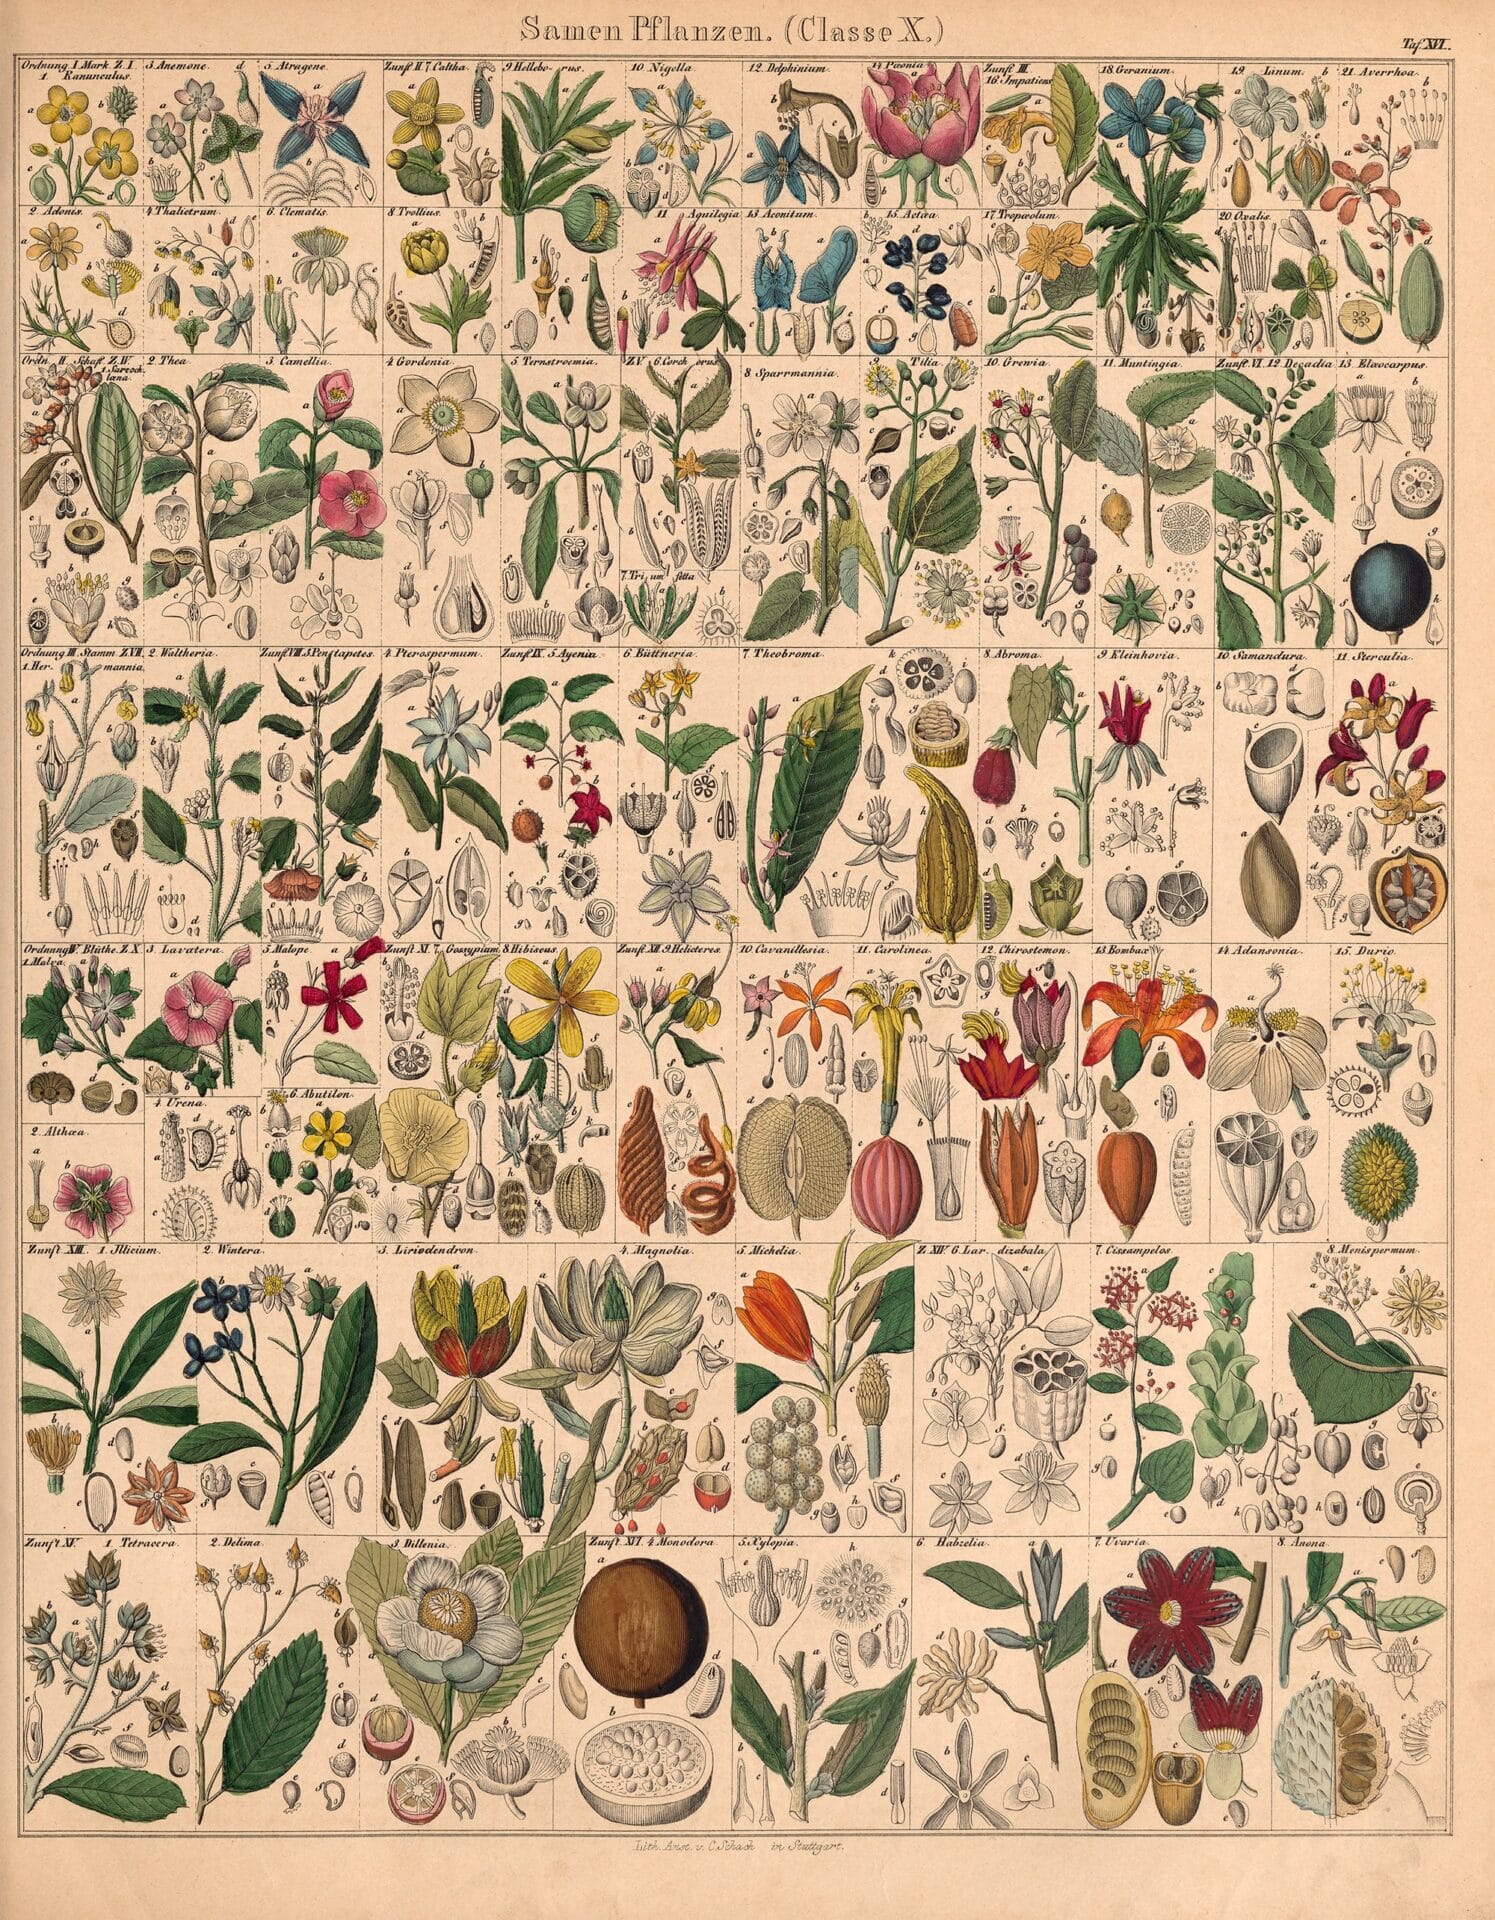 an 18th-century natural history book illustration of numerous plants and botanicals categorized on the page into a grid